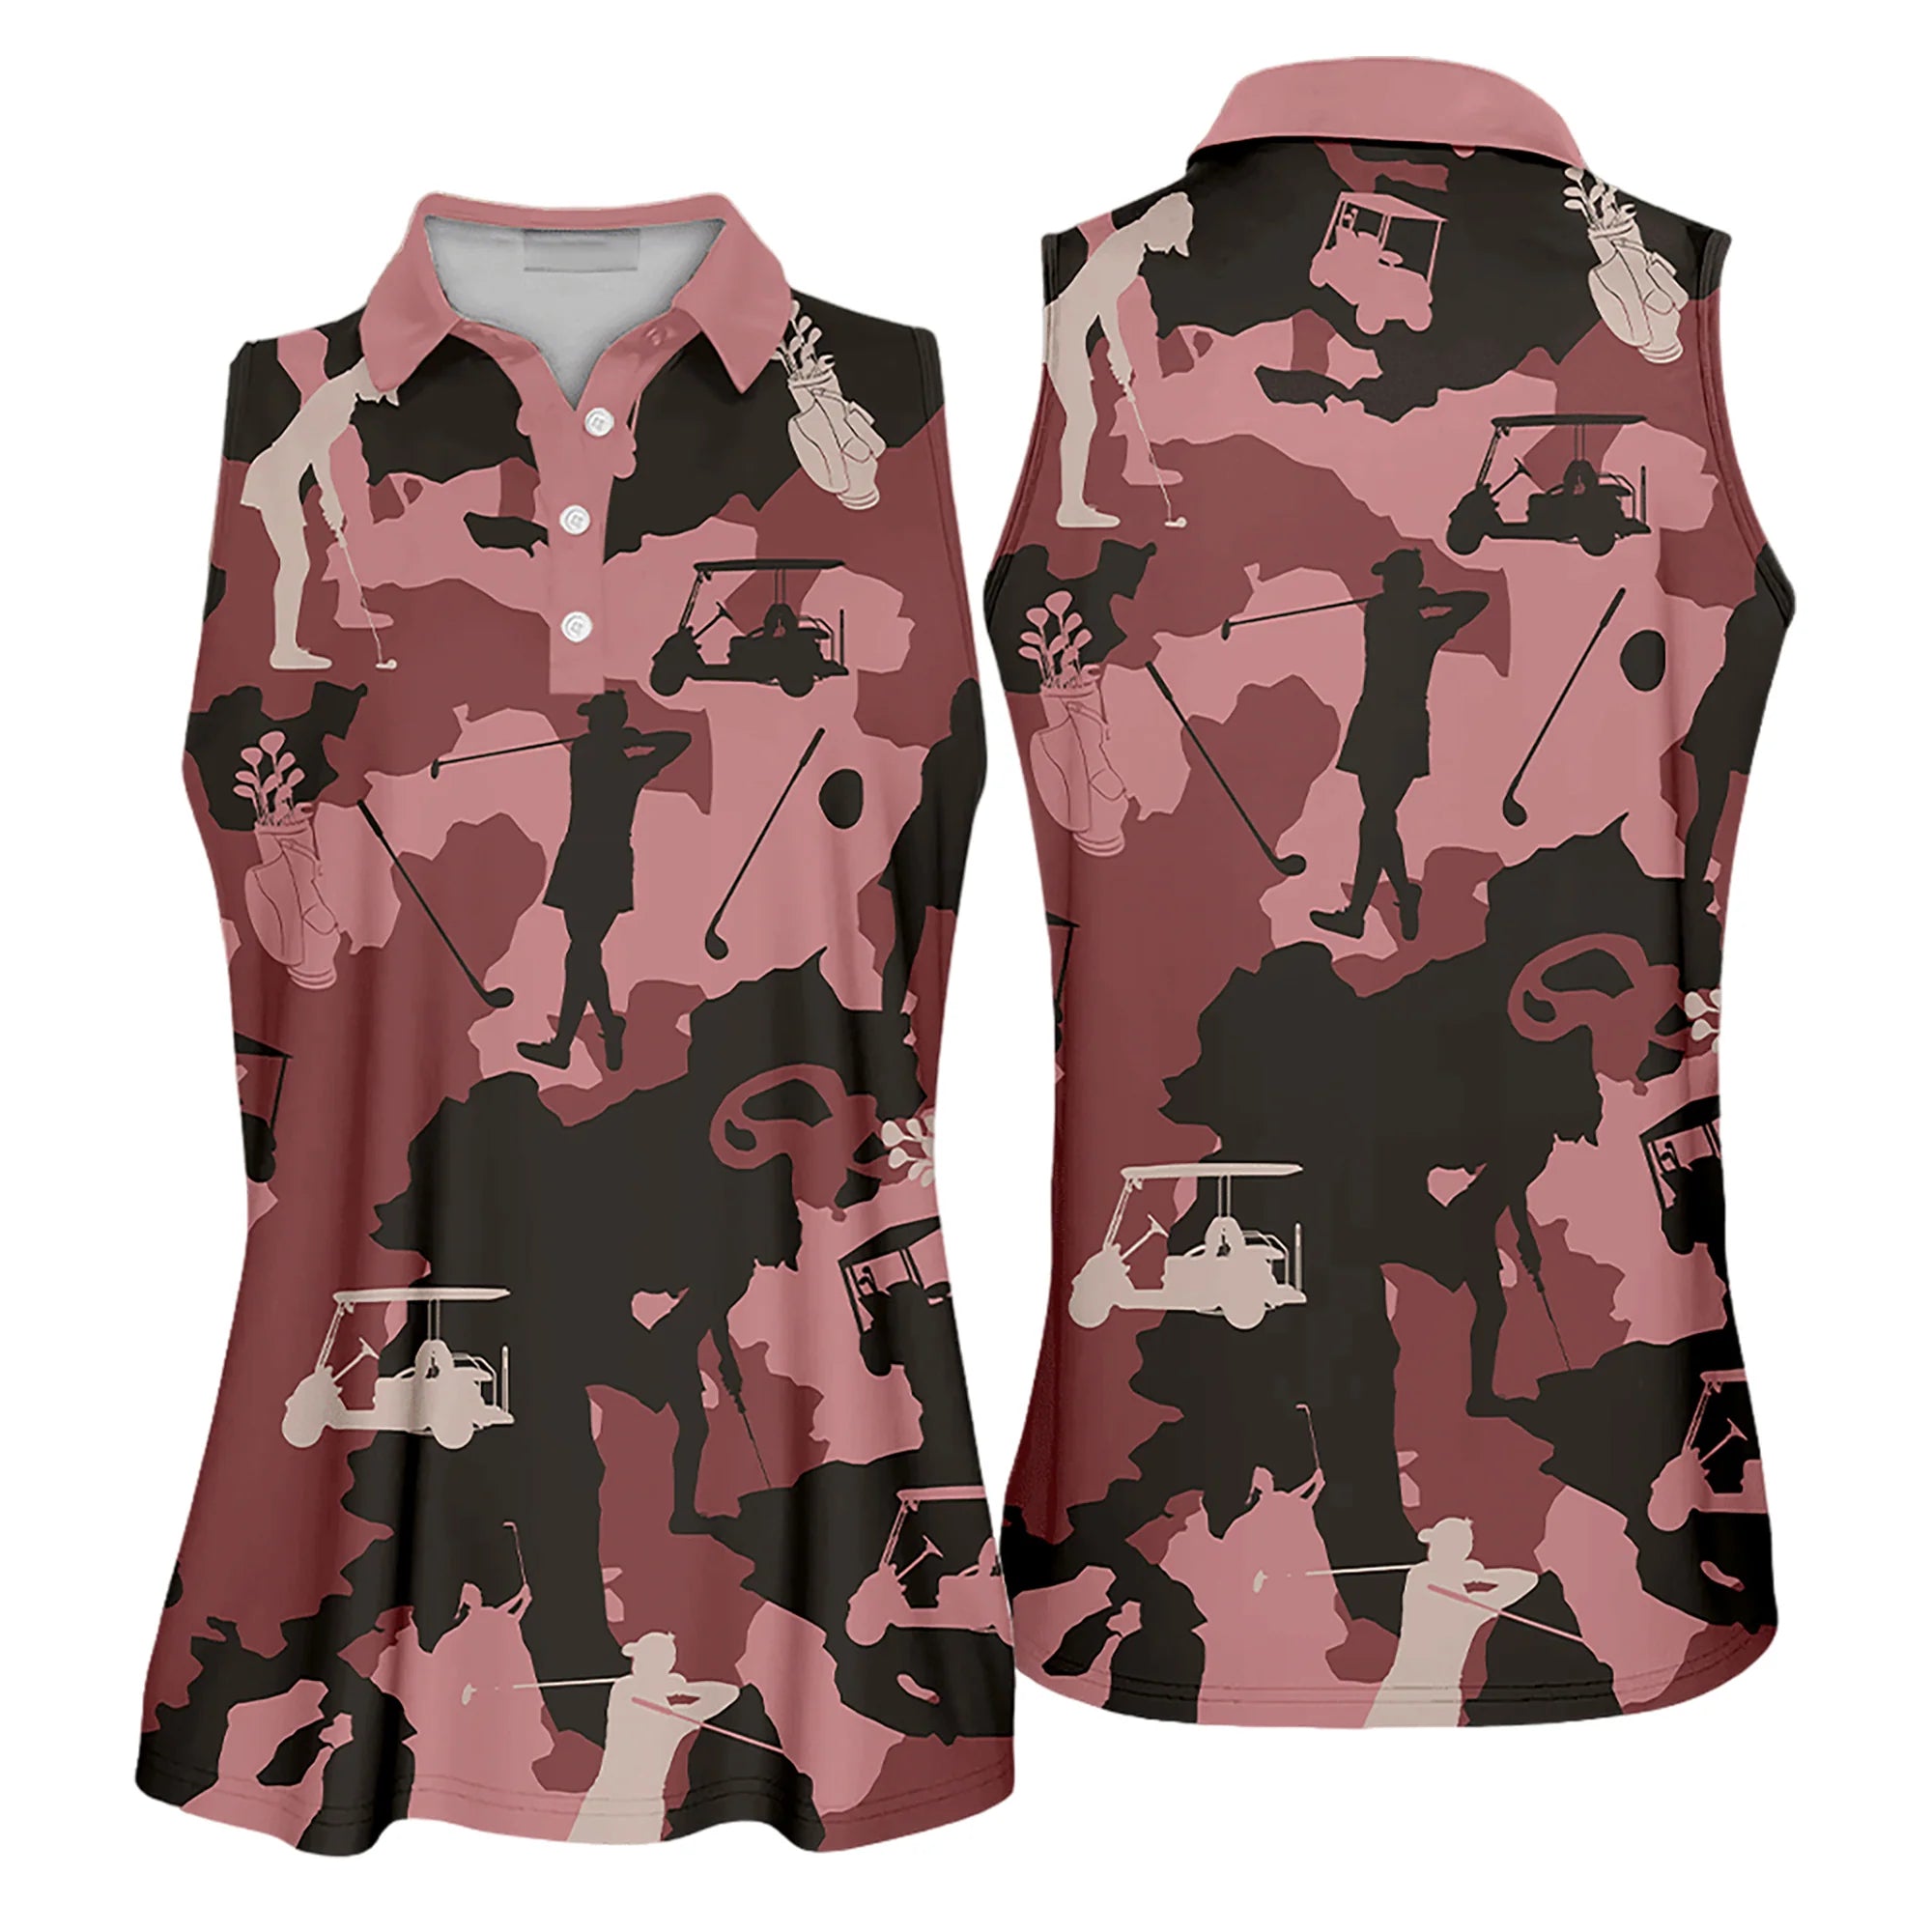 Golf Women Sleeveless Athleisure Polo Shirt, Golf Girl Camouflage Color - Gift For Golfers, Females, Golf Lovers, Mother's Day